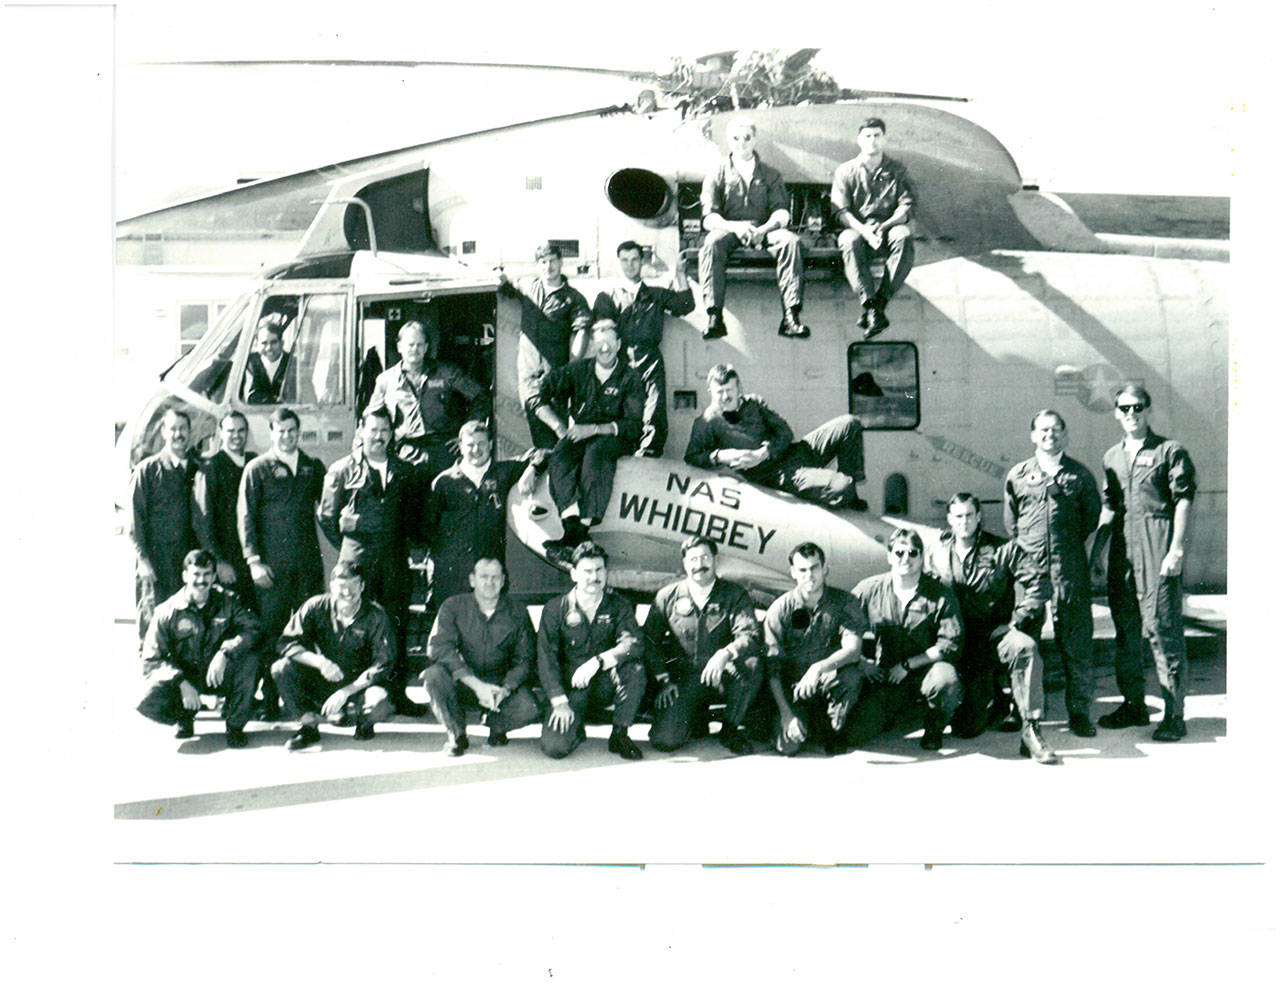 The team of Whidbey Island Search and Rescue members in 1986 gather around their Sikorsky H3 Sea King helicopter. Photo provided by Robert Davison